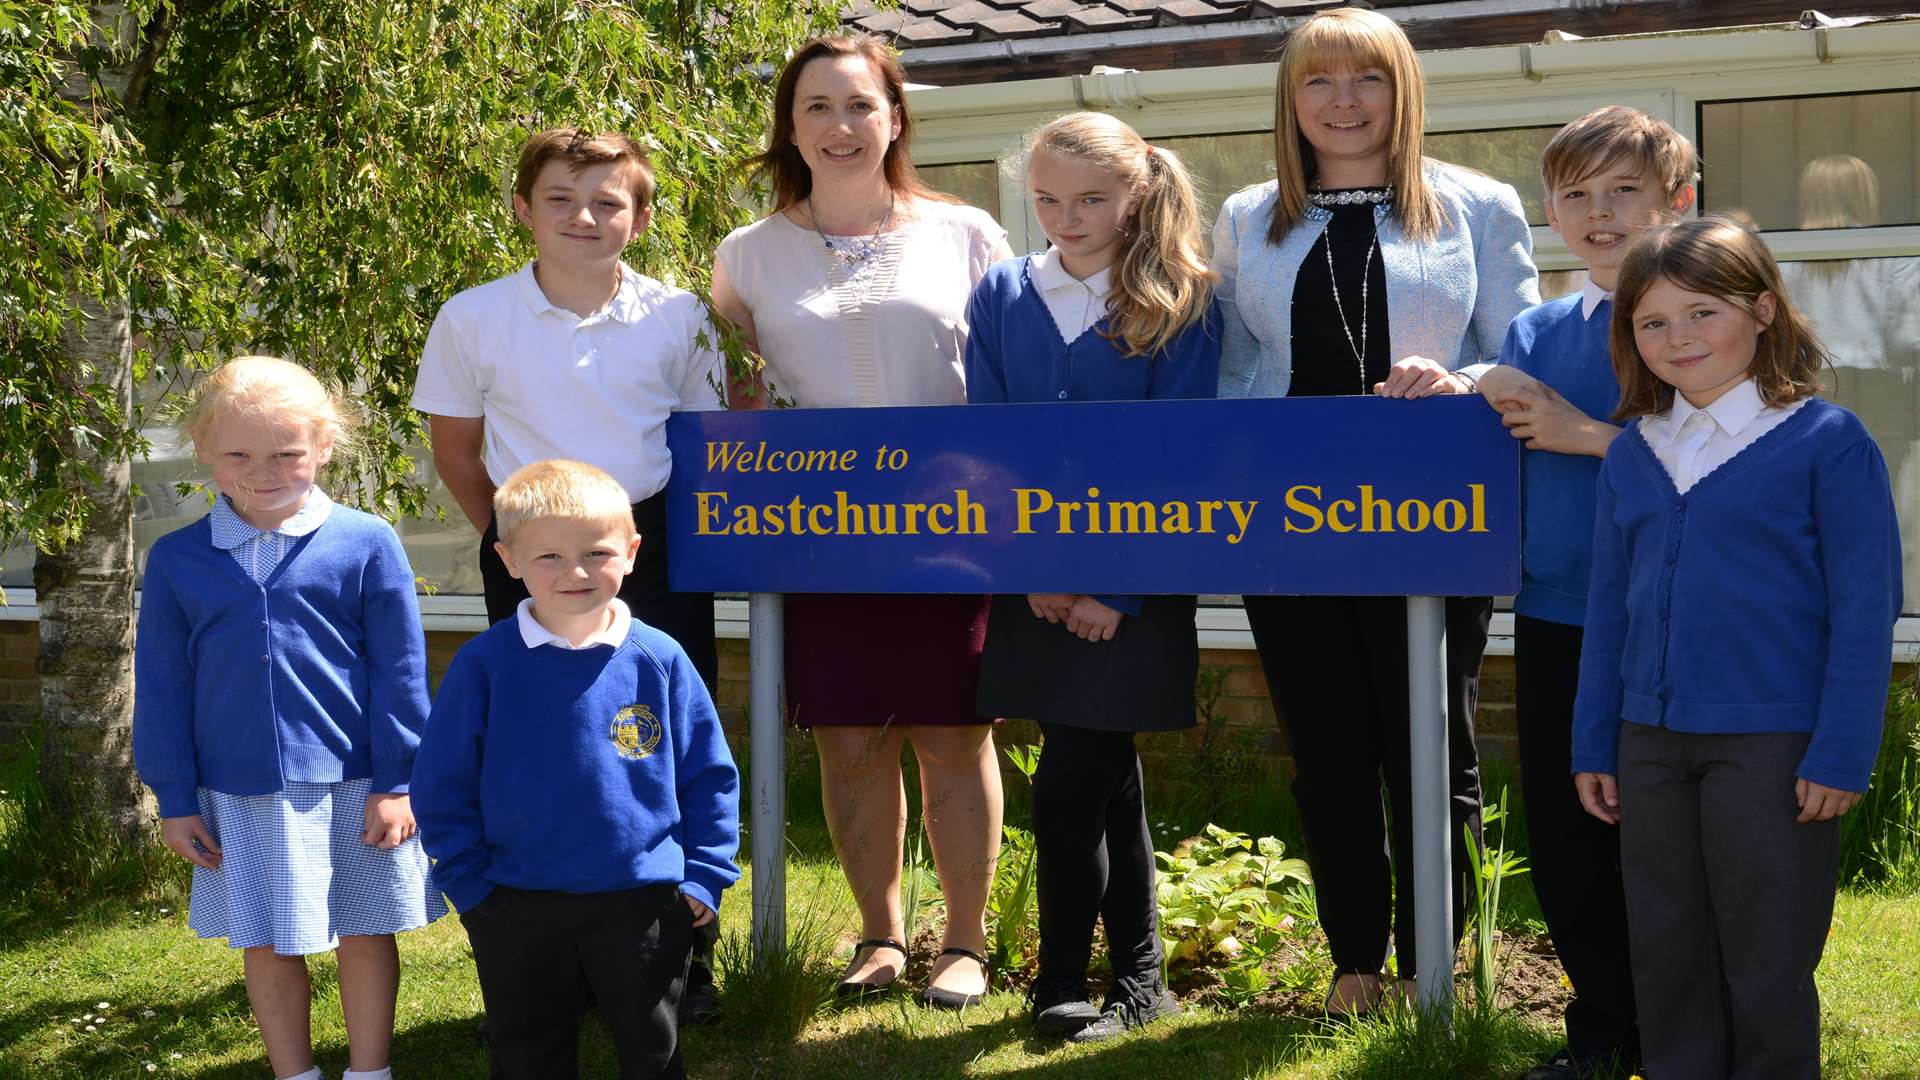 Head teachers Sarah Hunt and Michelle Crowe with some of the children from both school sites